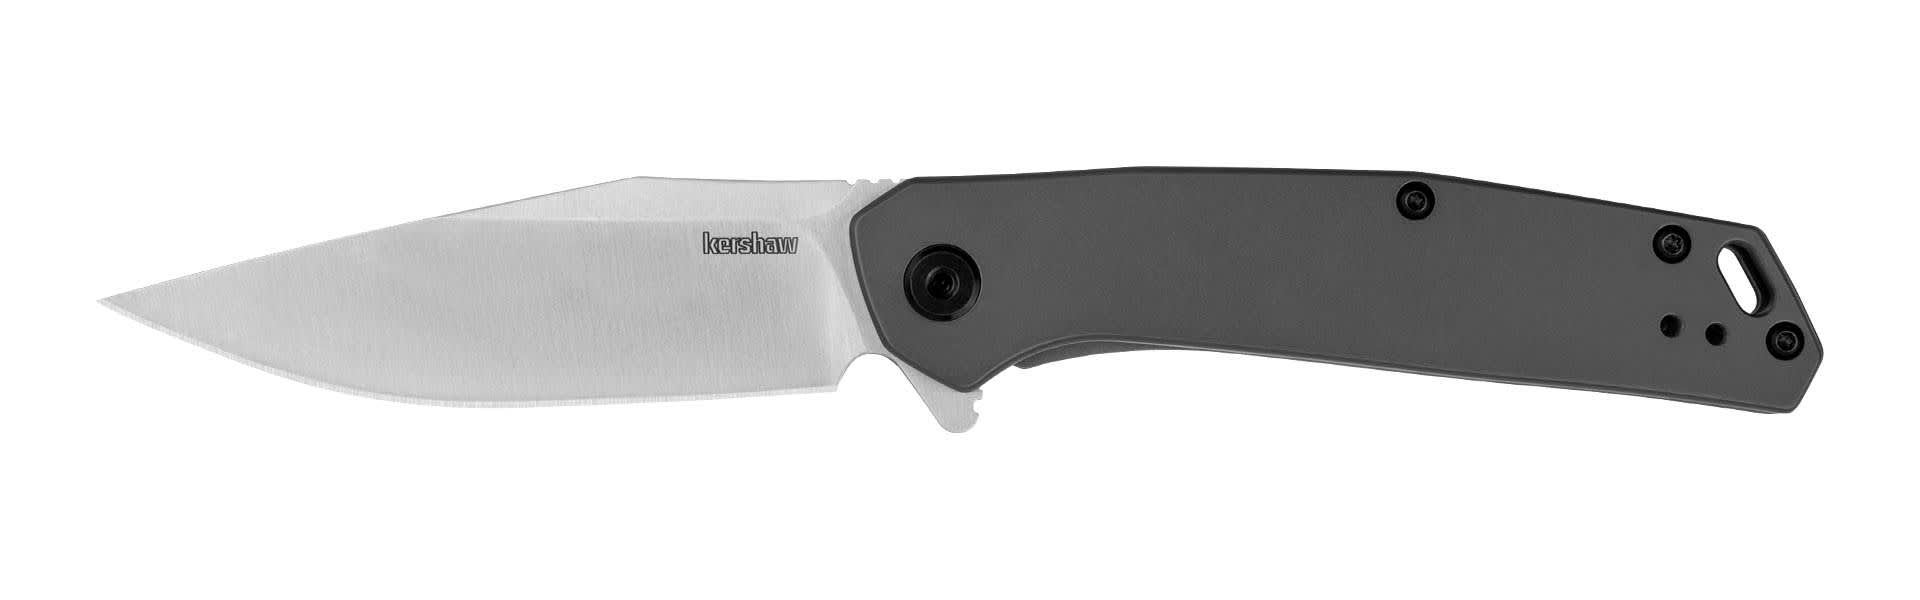 Kershaw® Align Assisted Folding Blade Knife